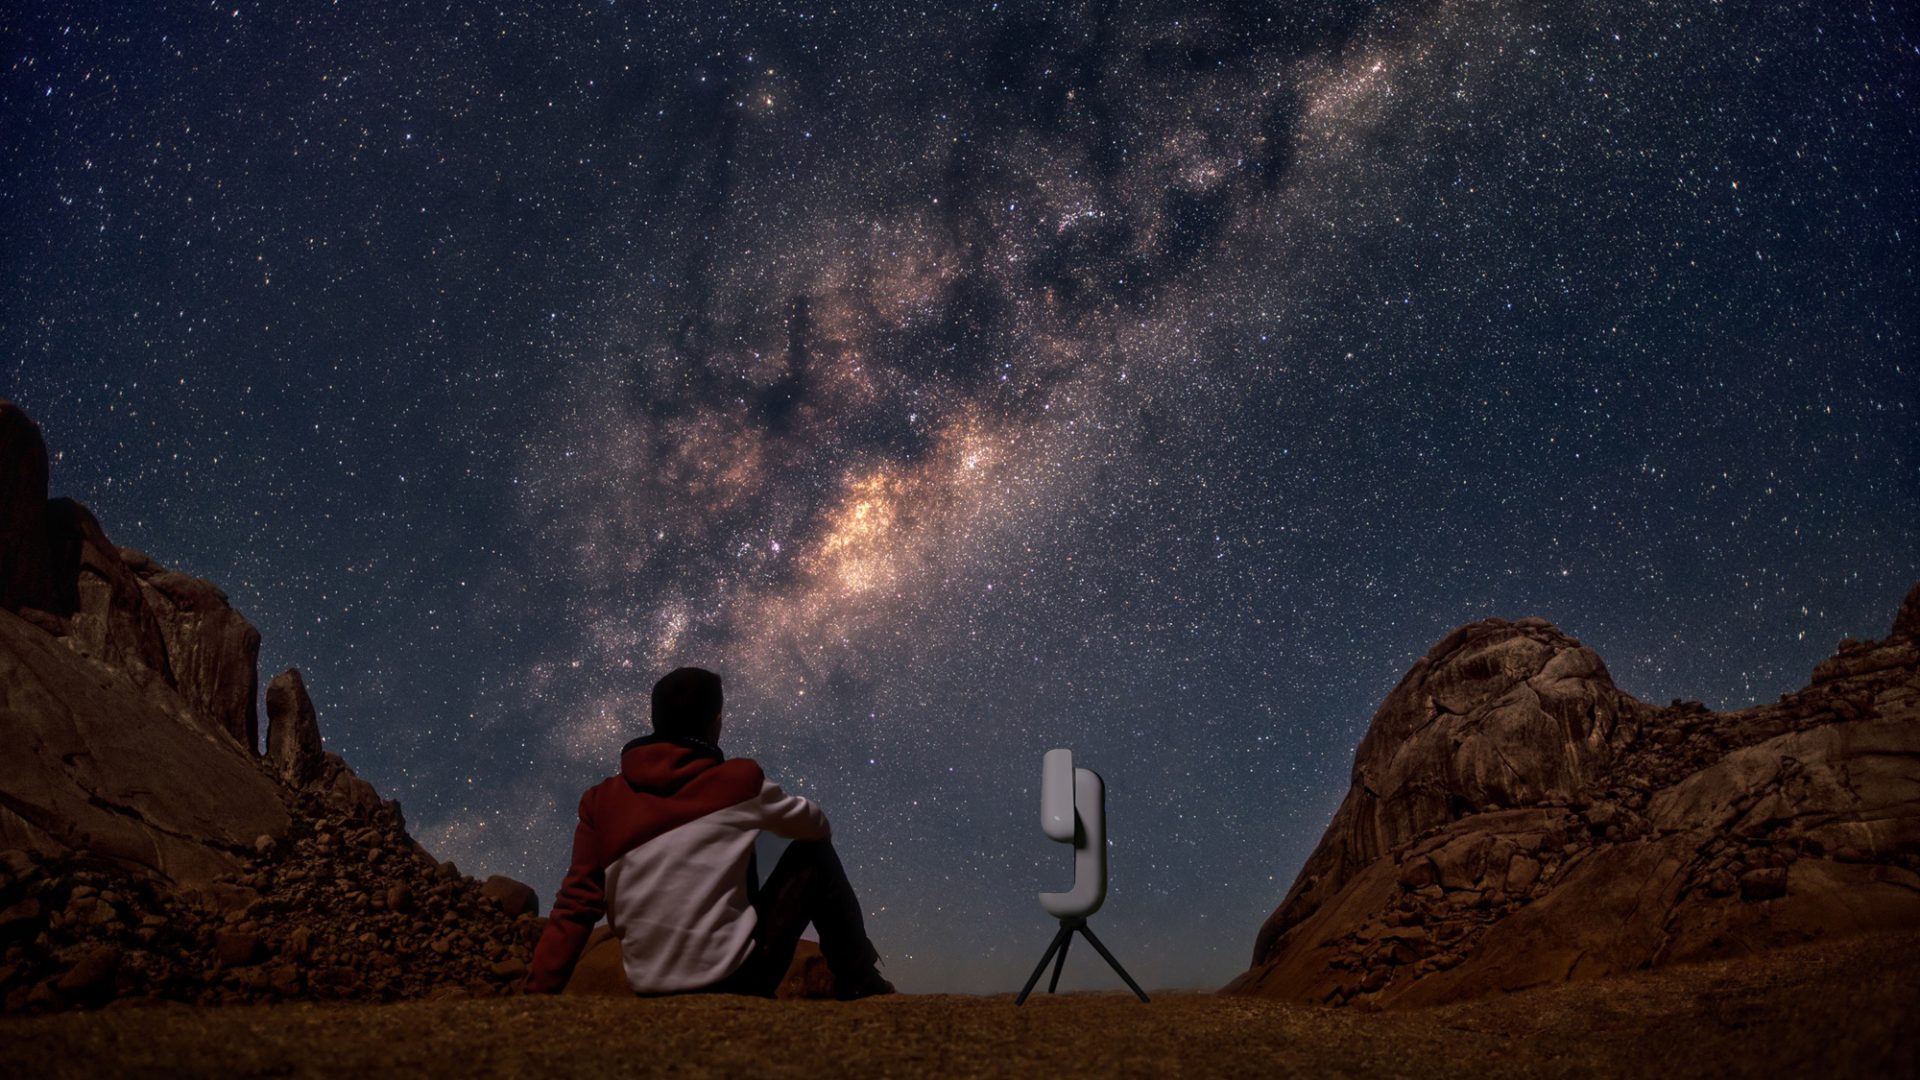 Vespera, a elegant telescope to invent astrophotography more uncomplicated, nabs CES 2021 Innovation Award